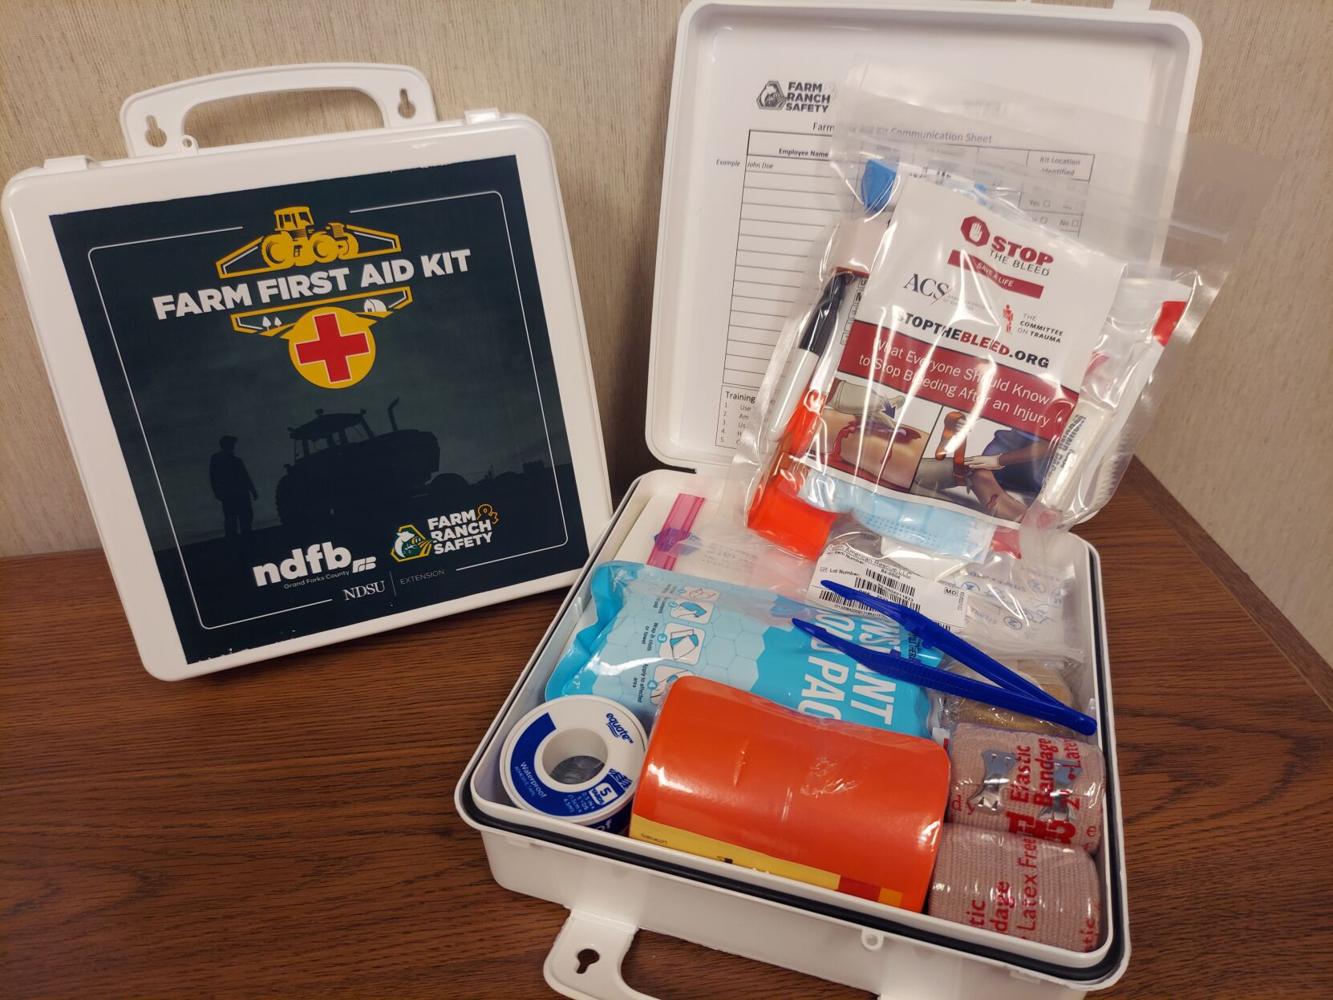 NDSU Extension supplies farm firstaid kit and training